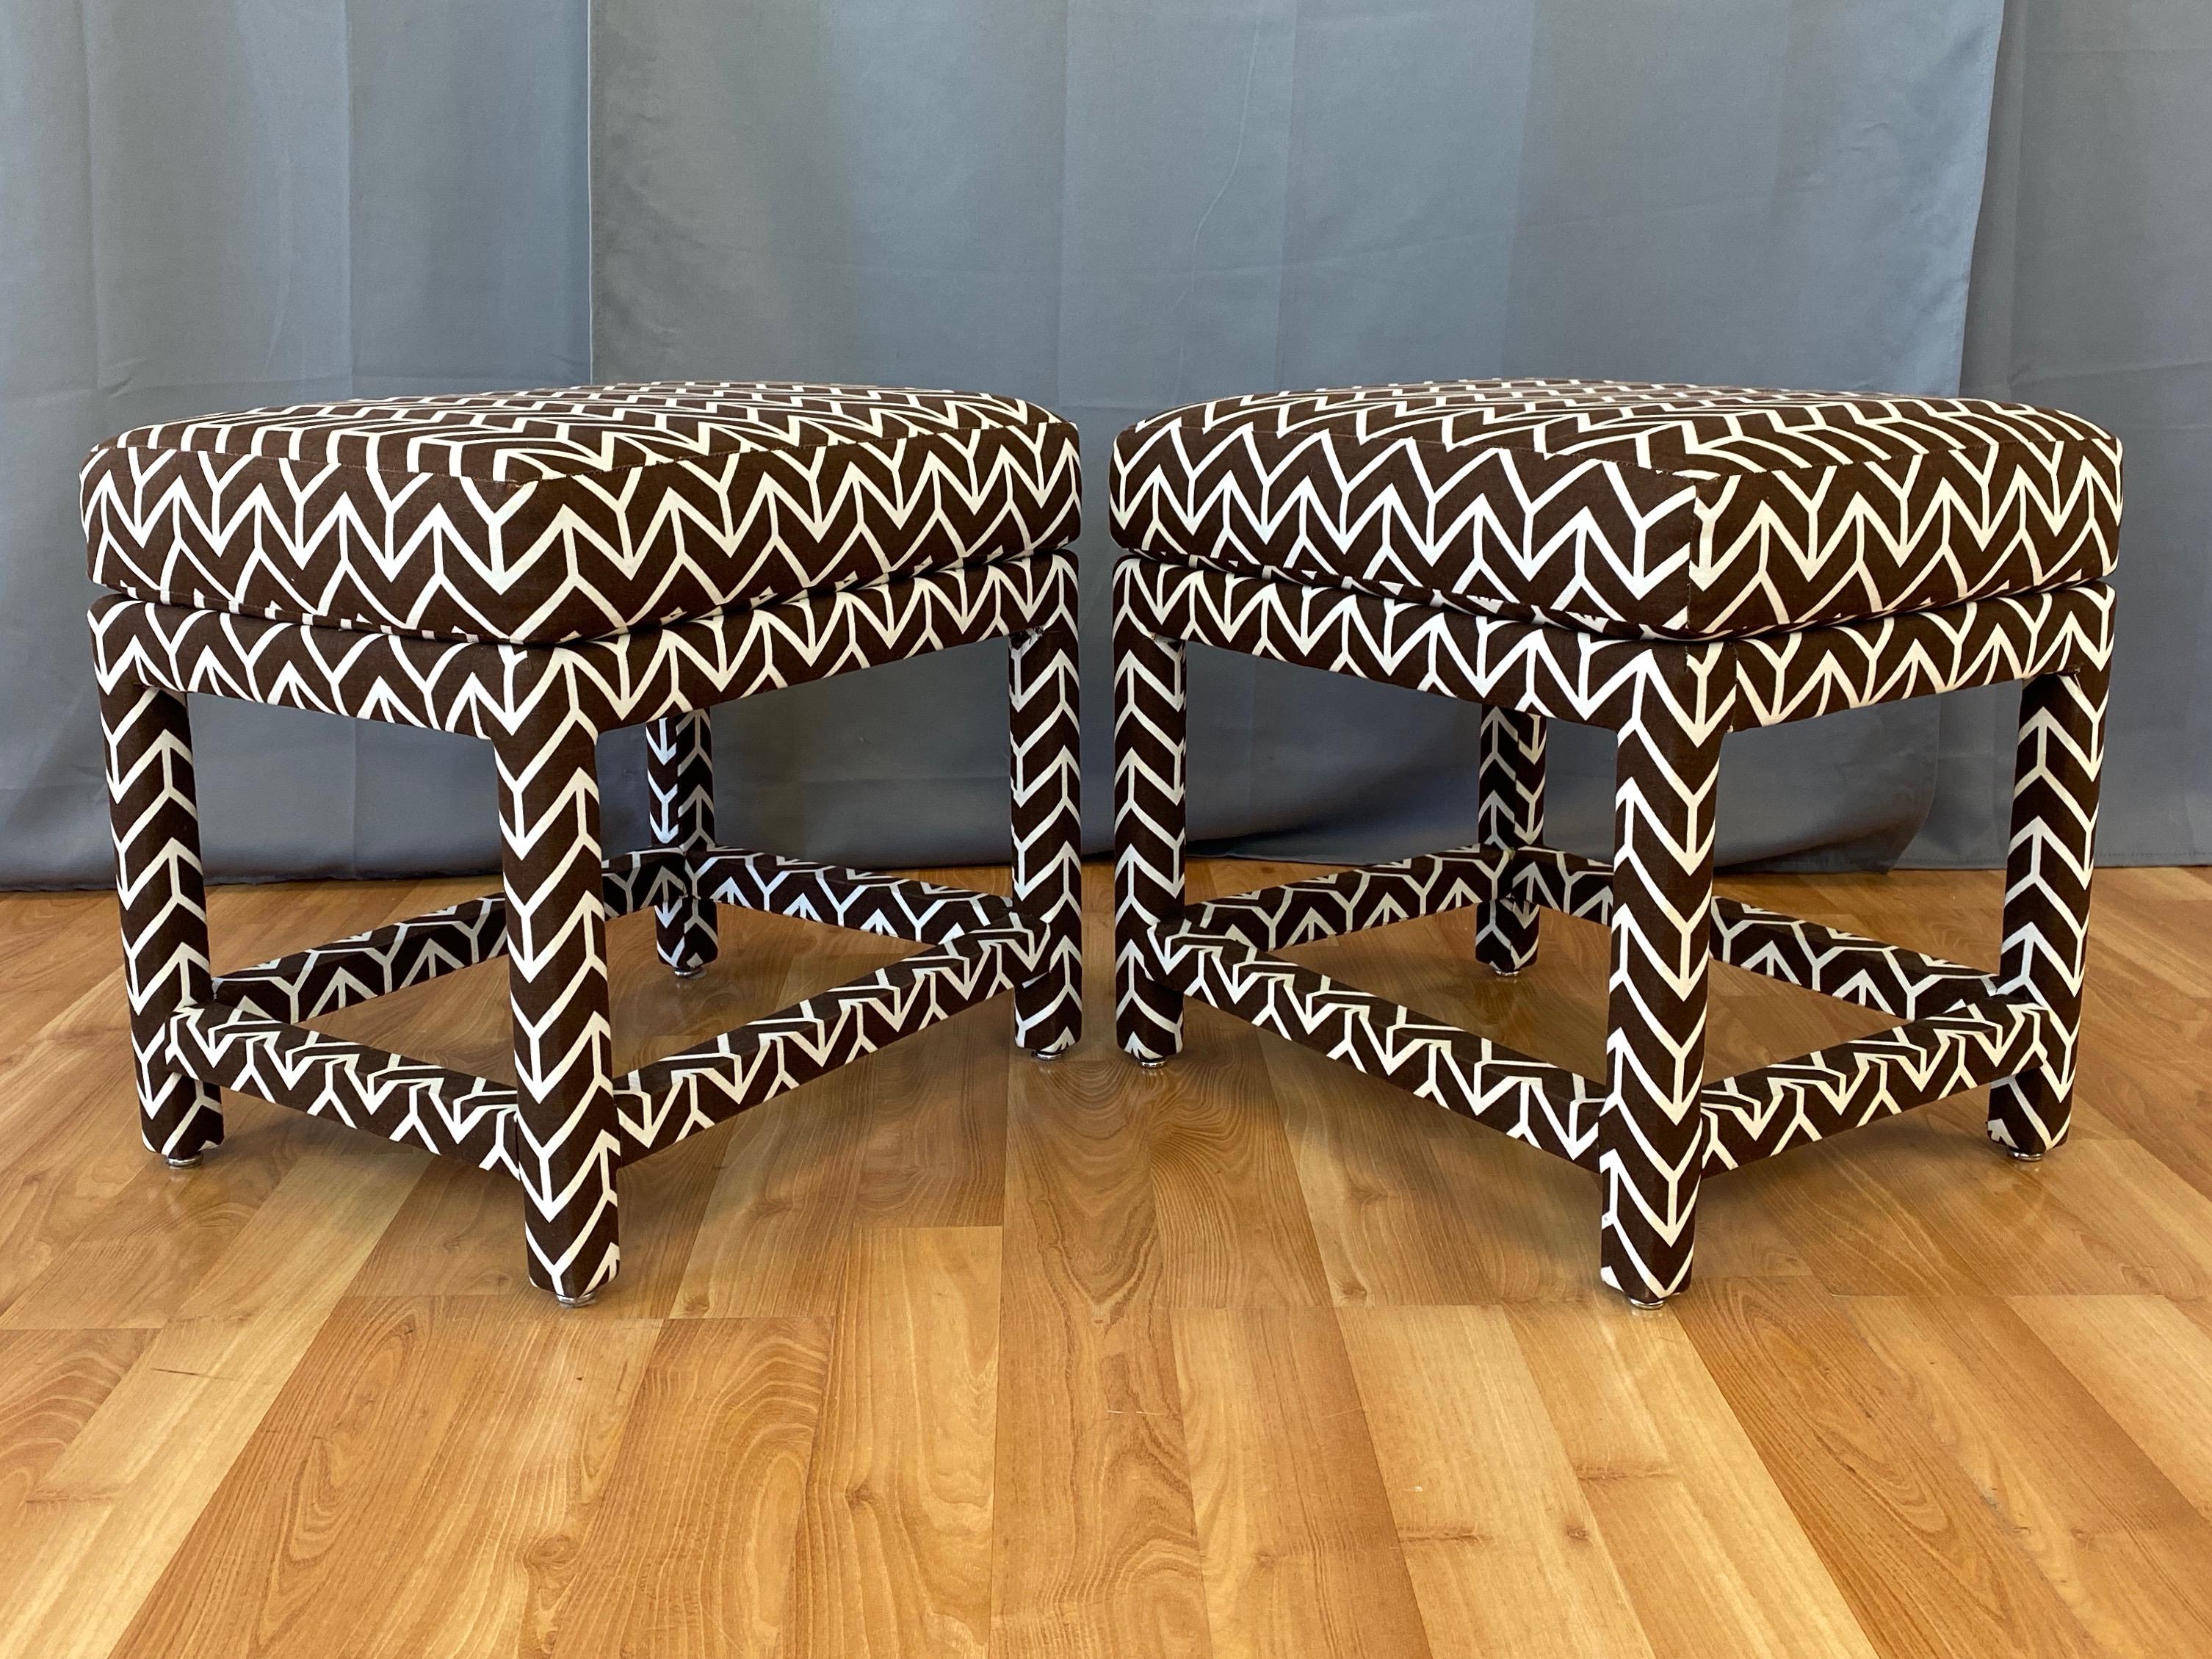 A pair of super chic fully upholstered 1970s ottomans by Milo Baughman for Thayer Coggin.

David Hicks for Schumacher crisp “Chevron” geometric pattern fabric in retired chocolate brown on warm off-white cotton. Upholstery over high-quality and